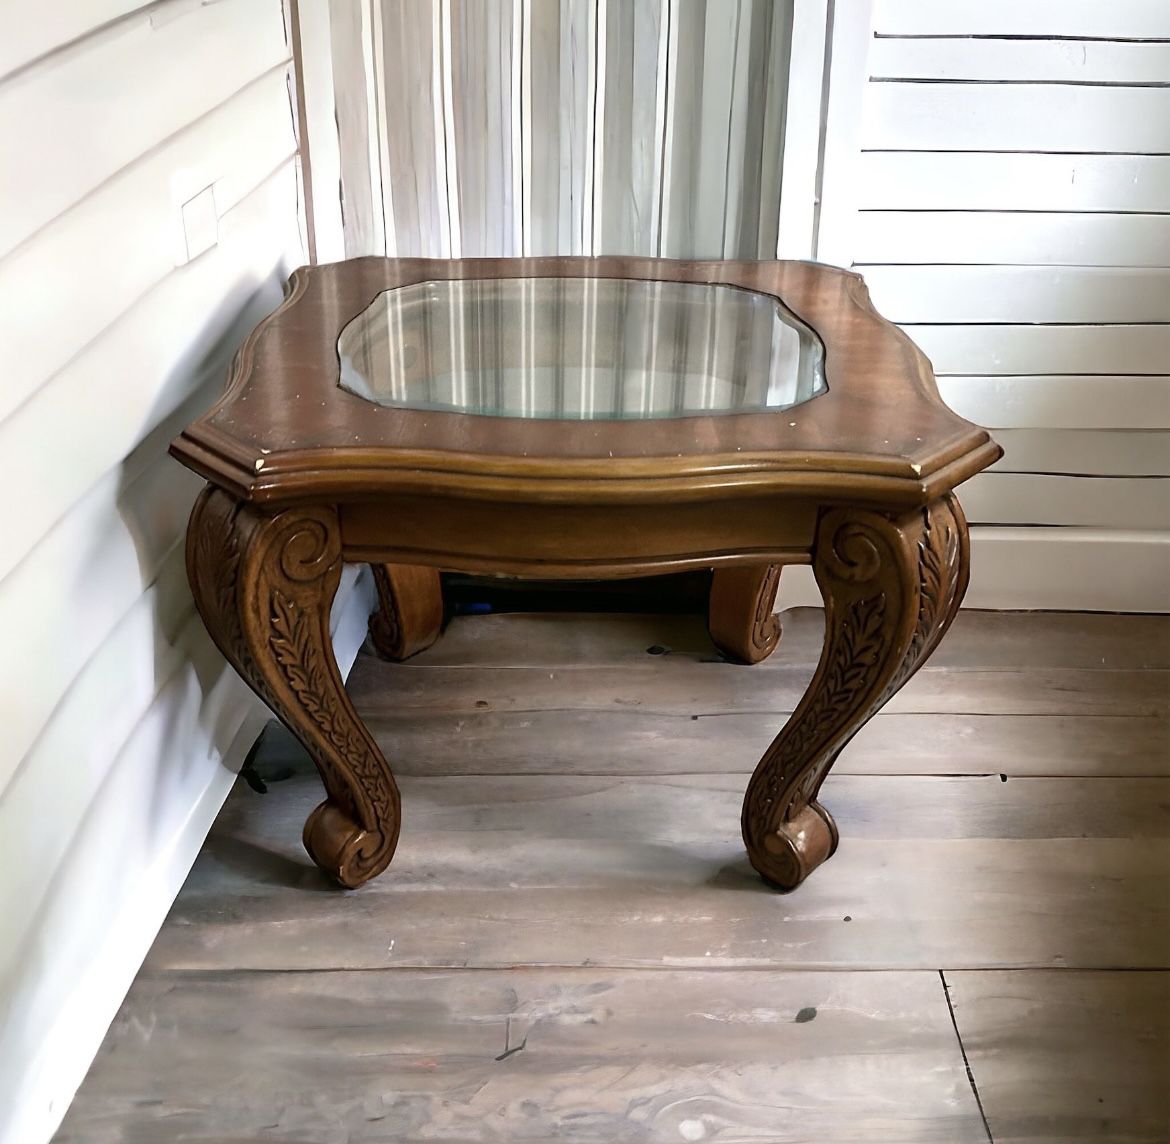 $10 for Wood Glass Side Table/End Table